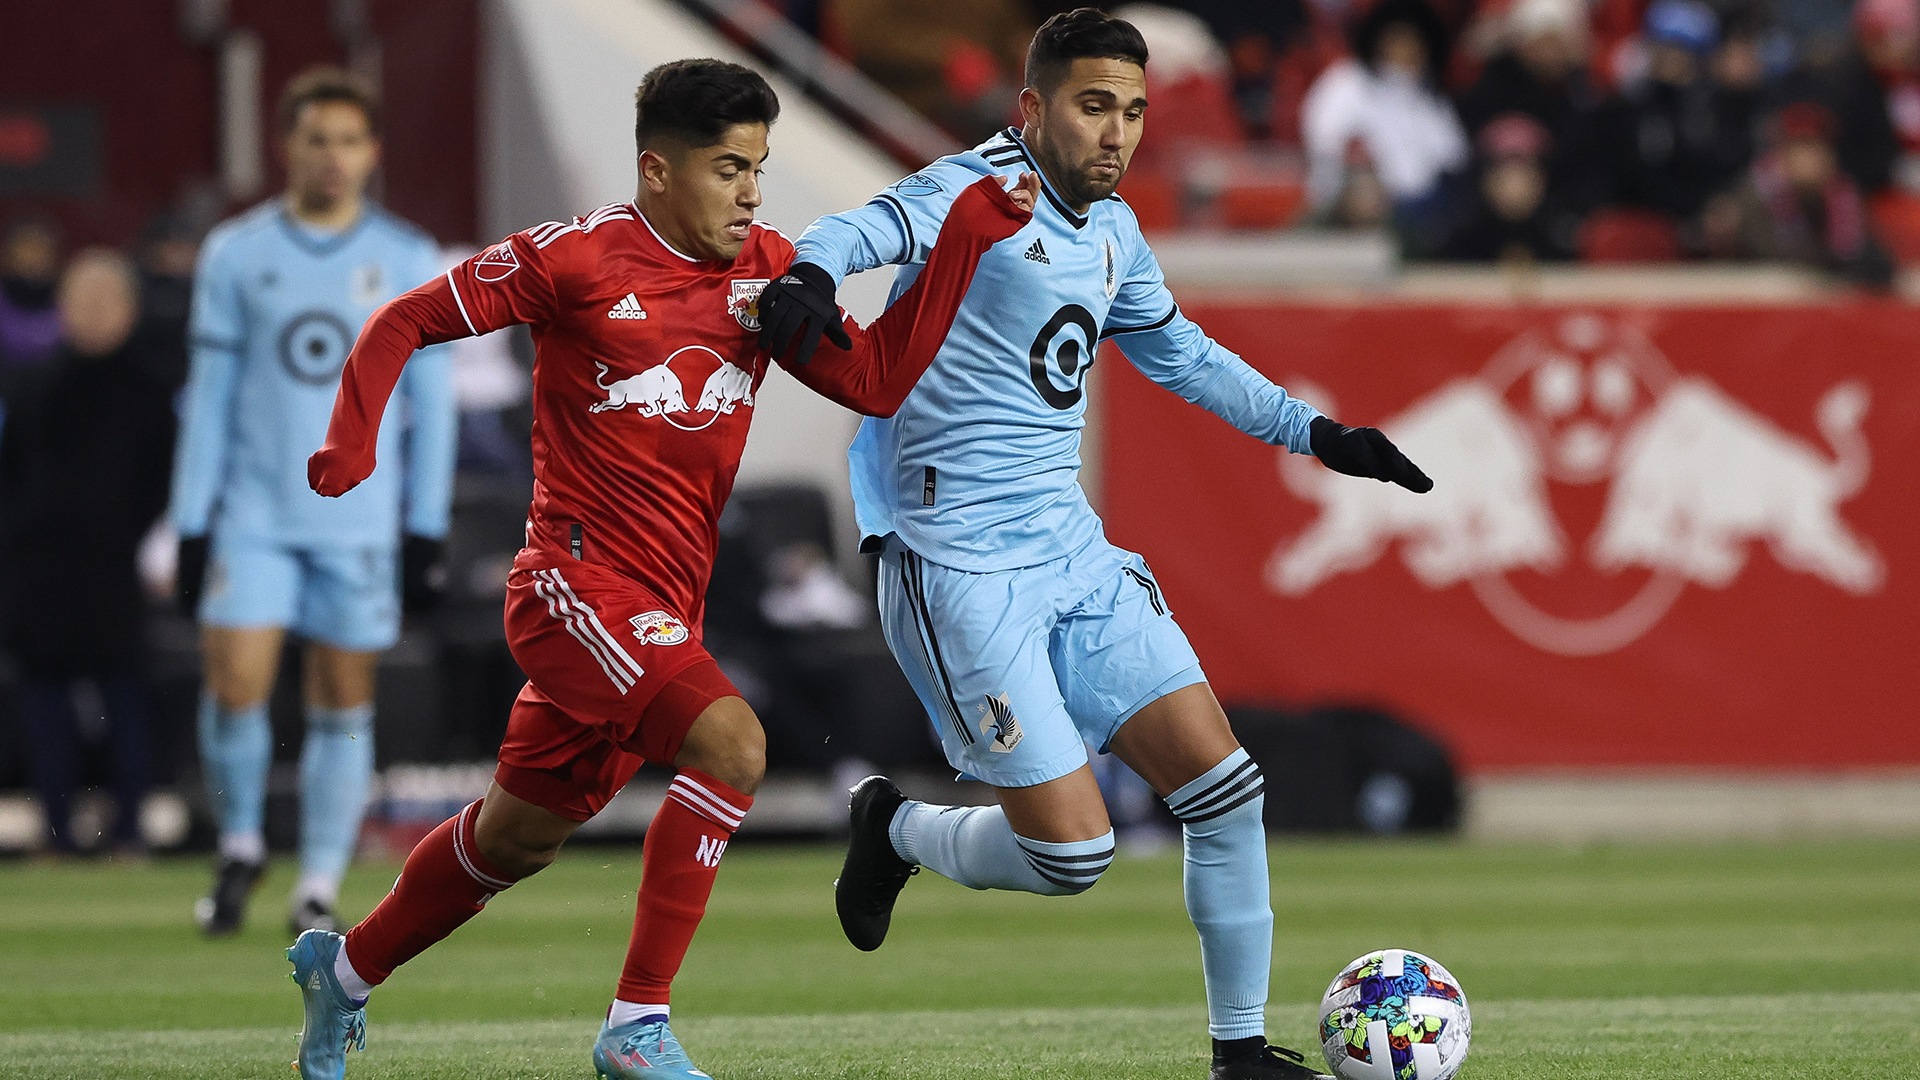 Olé! Who are the top dribblers in the MLS?